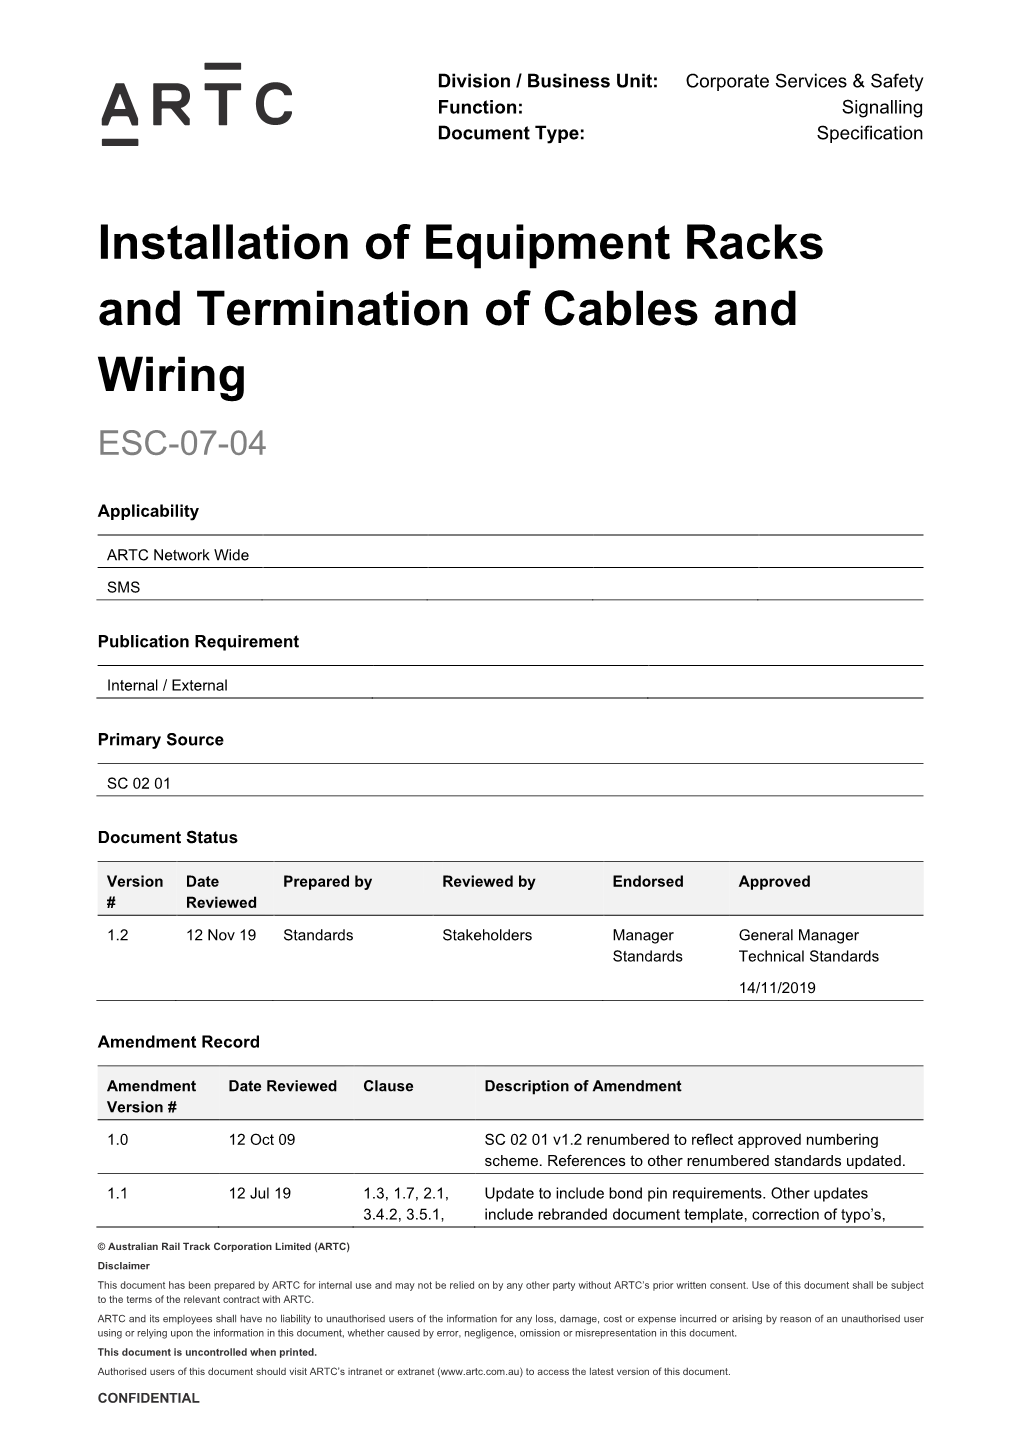 Installation of Equipment Racks and Termination of Cables and Wiring ESC-07-04